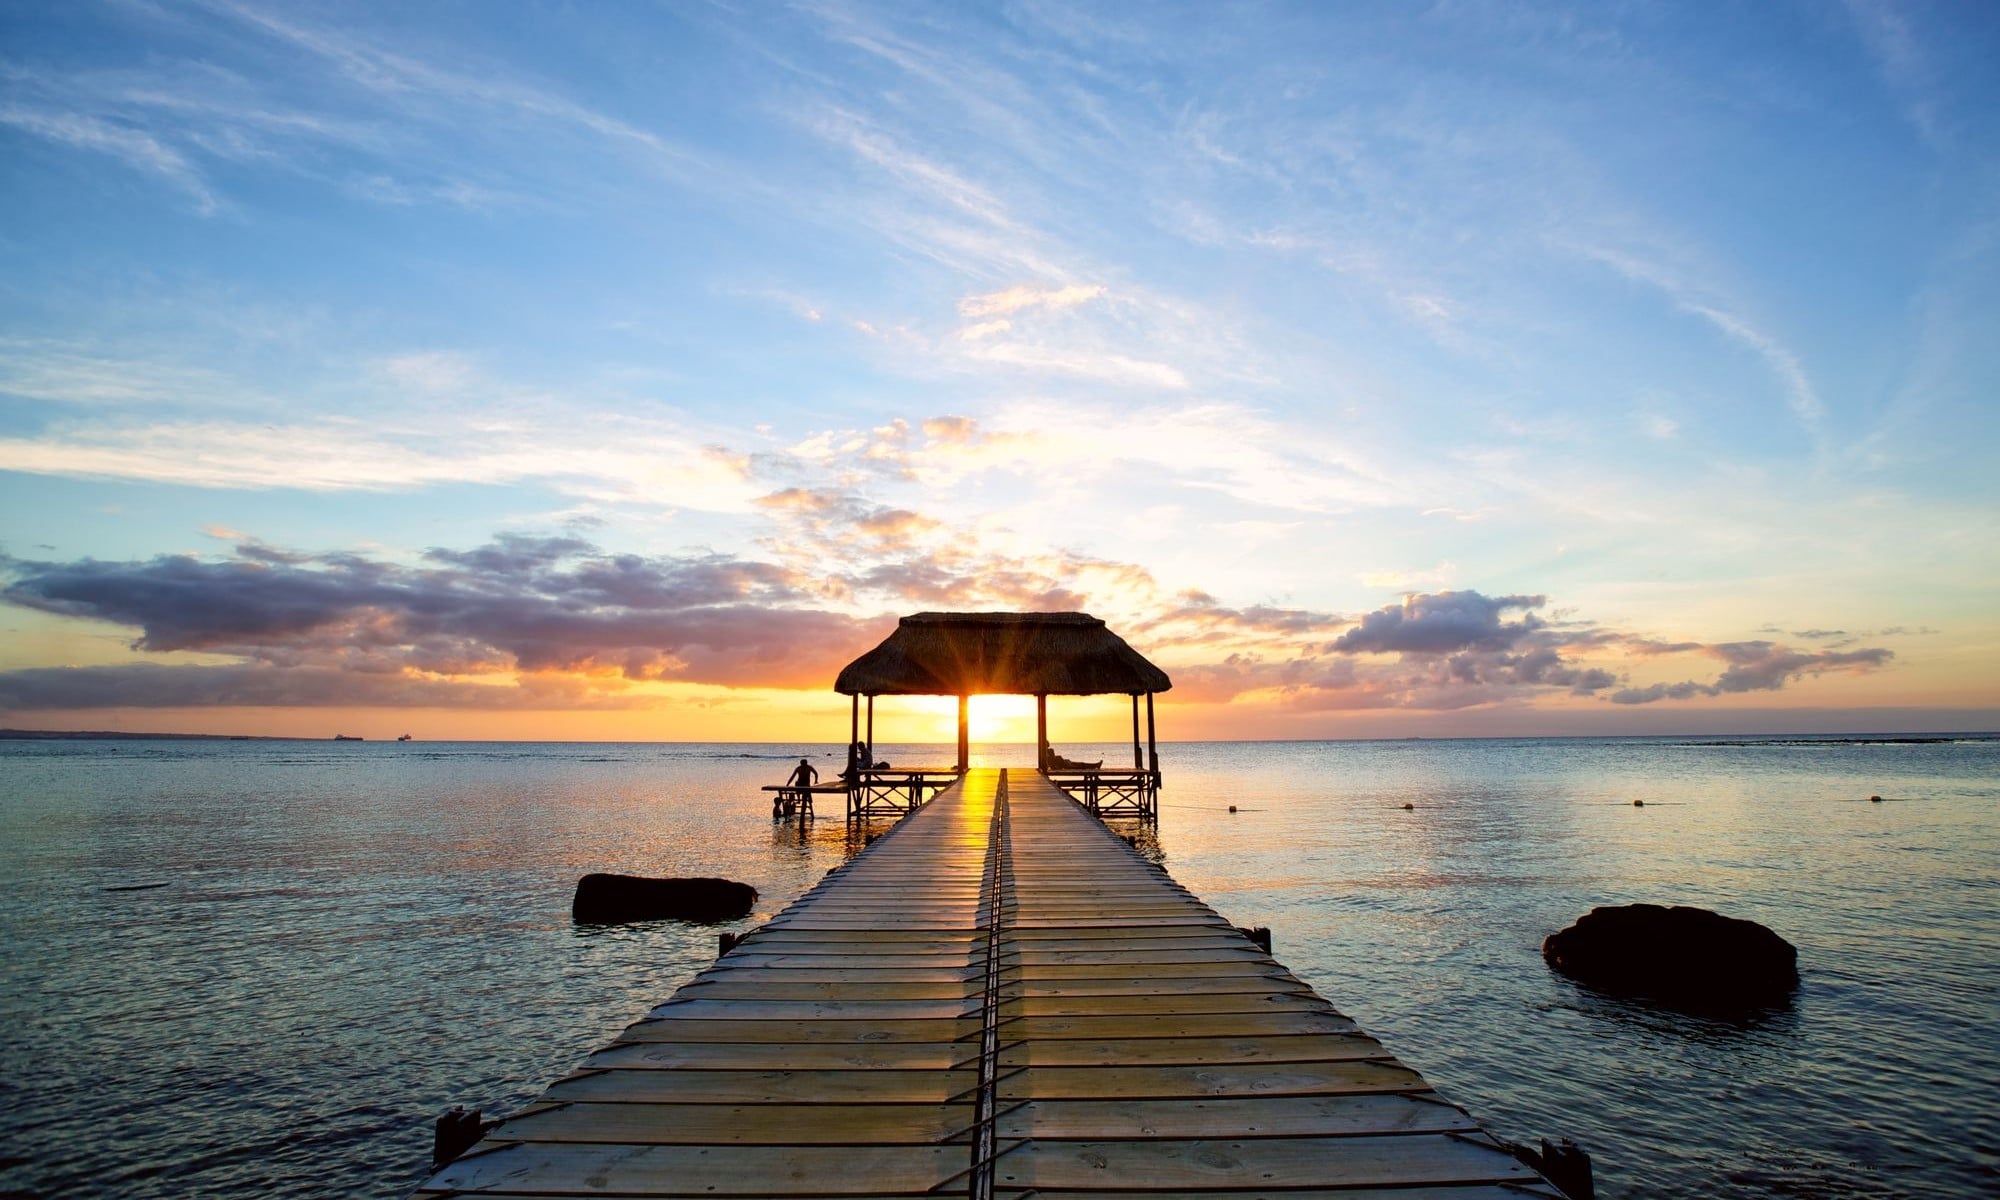 Jetty silhouette against beautiful sunset in Mauritius Island